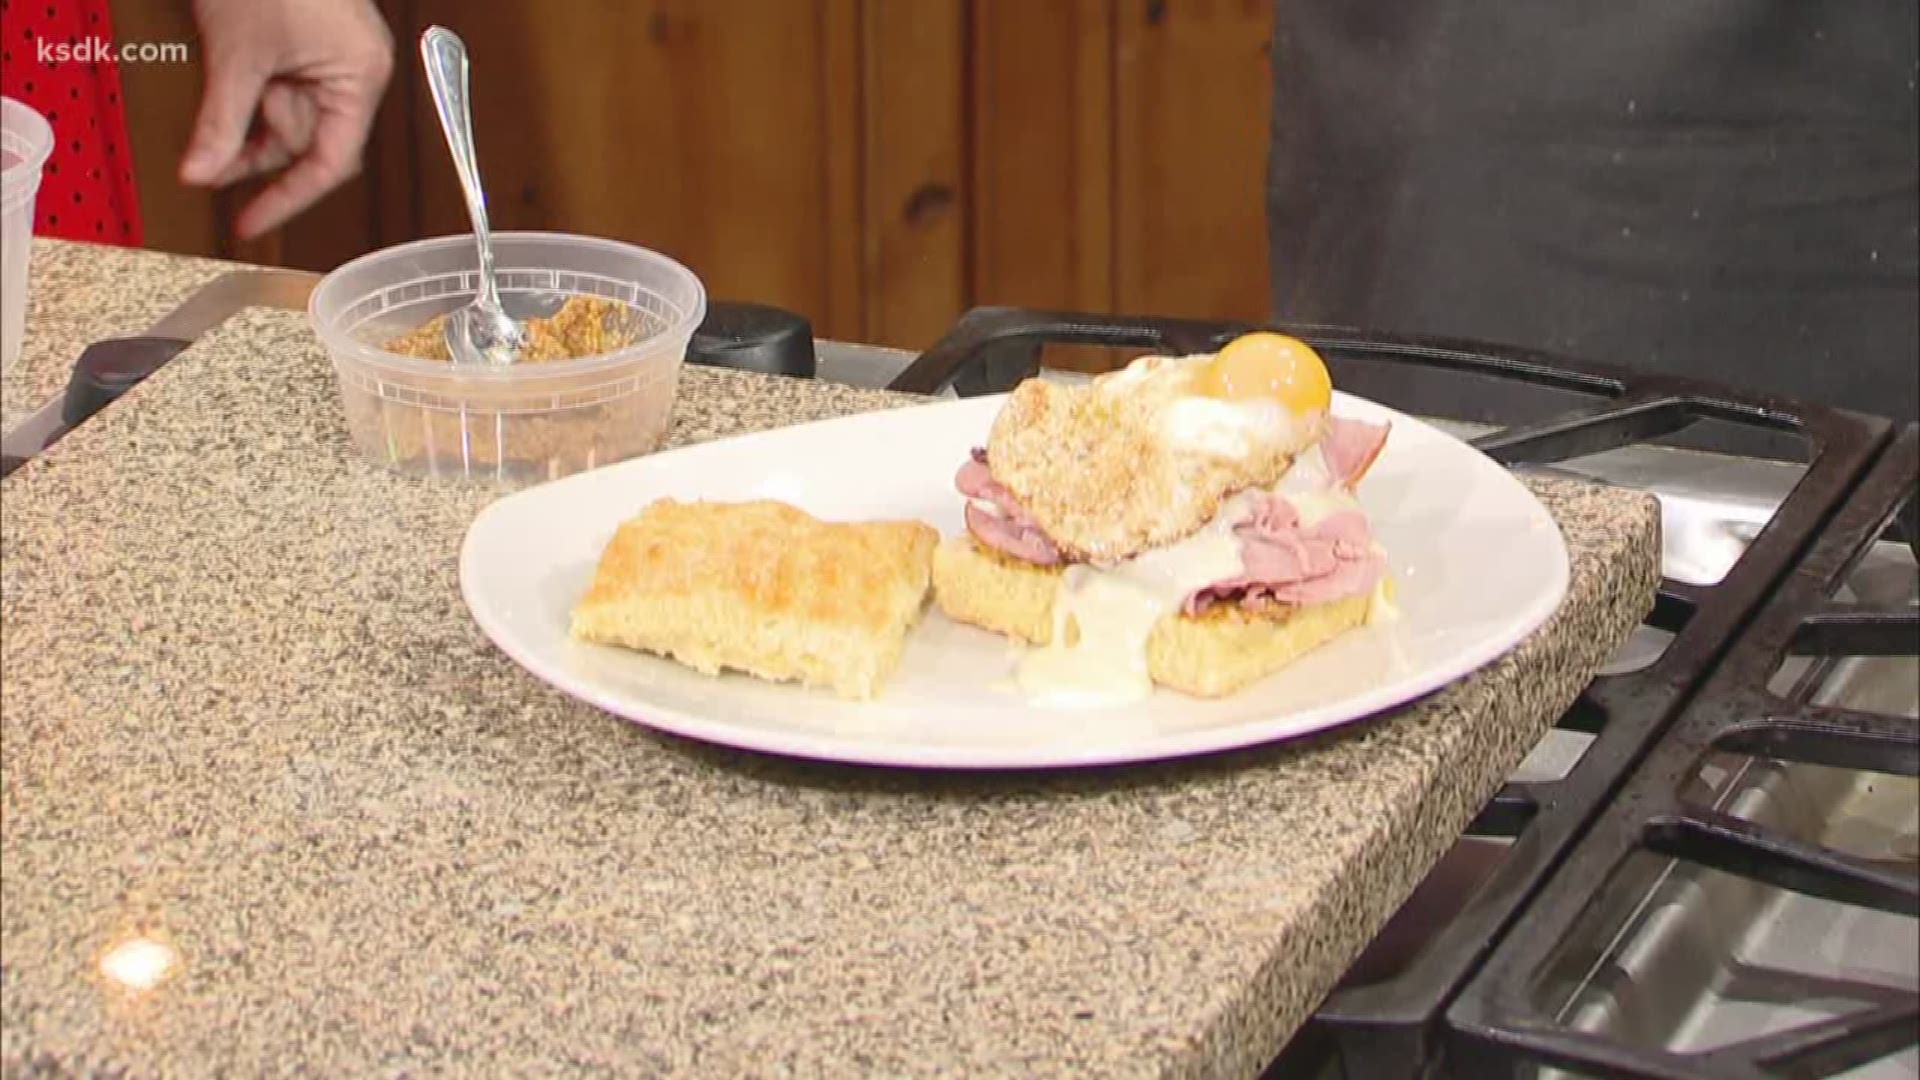 ‘Culinary Couple’ the Gallinas demonstrate a breakfast for dinner recipe from their new restaurant, Winslow’s Table.